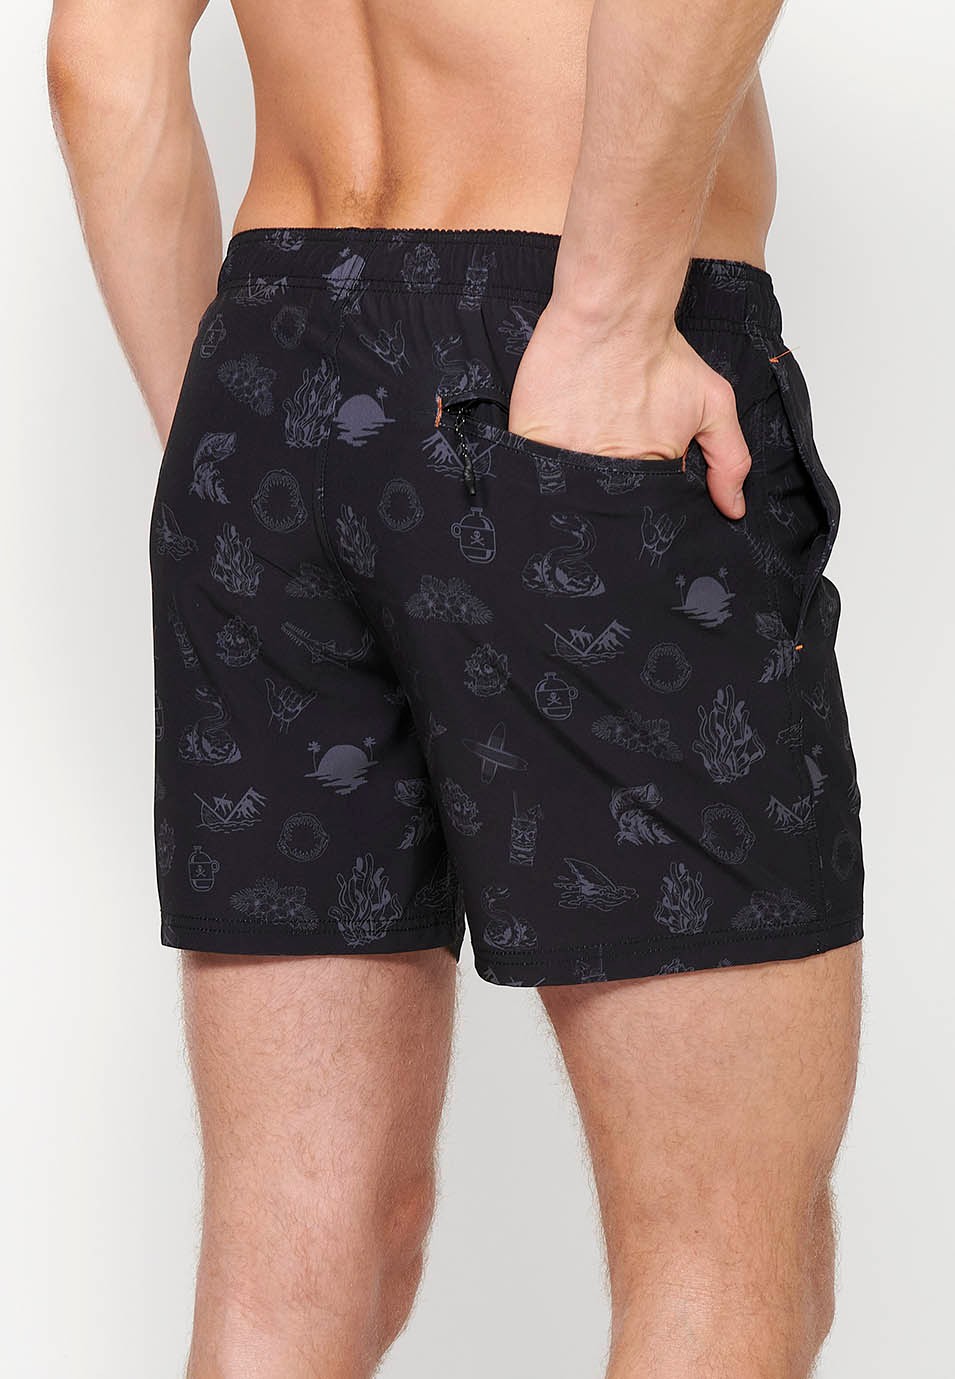 Printed short swimsuit with adjustable waist with drawstring and back pocket and an inner gray color for men 5